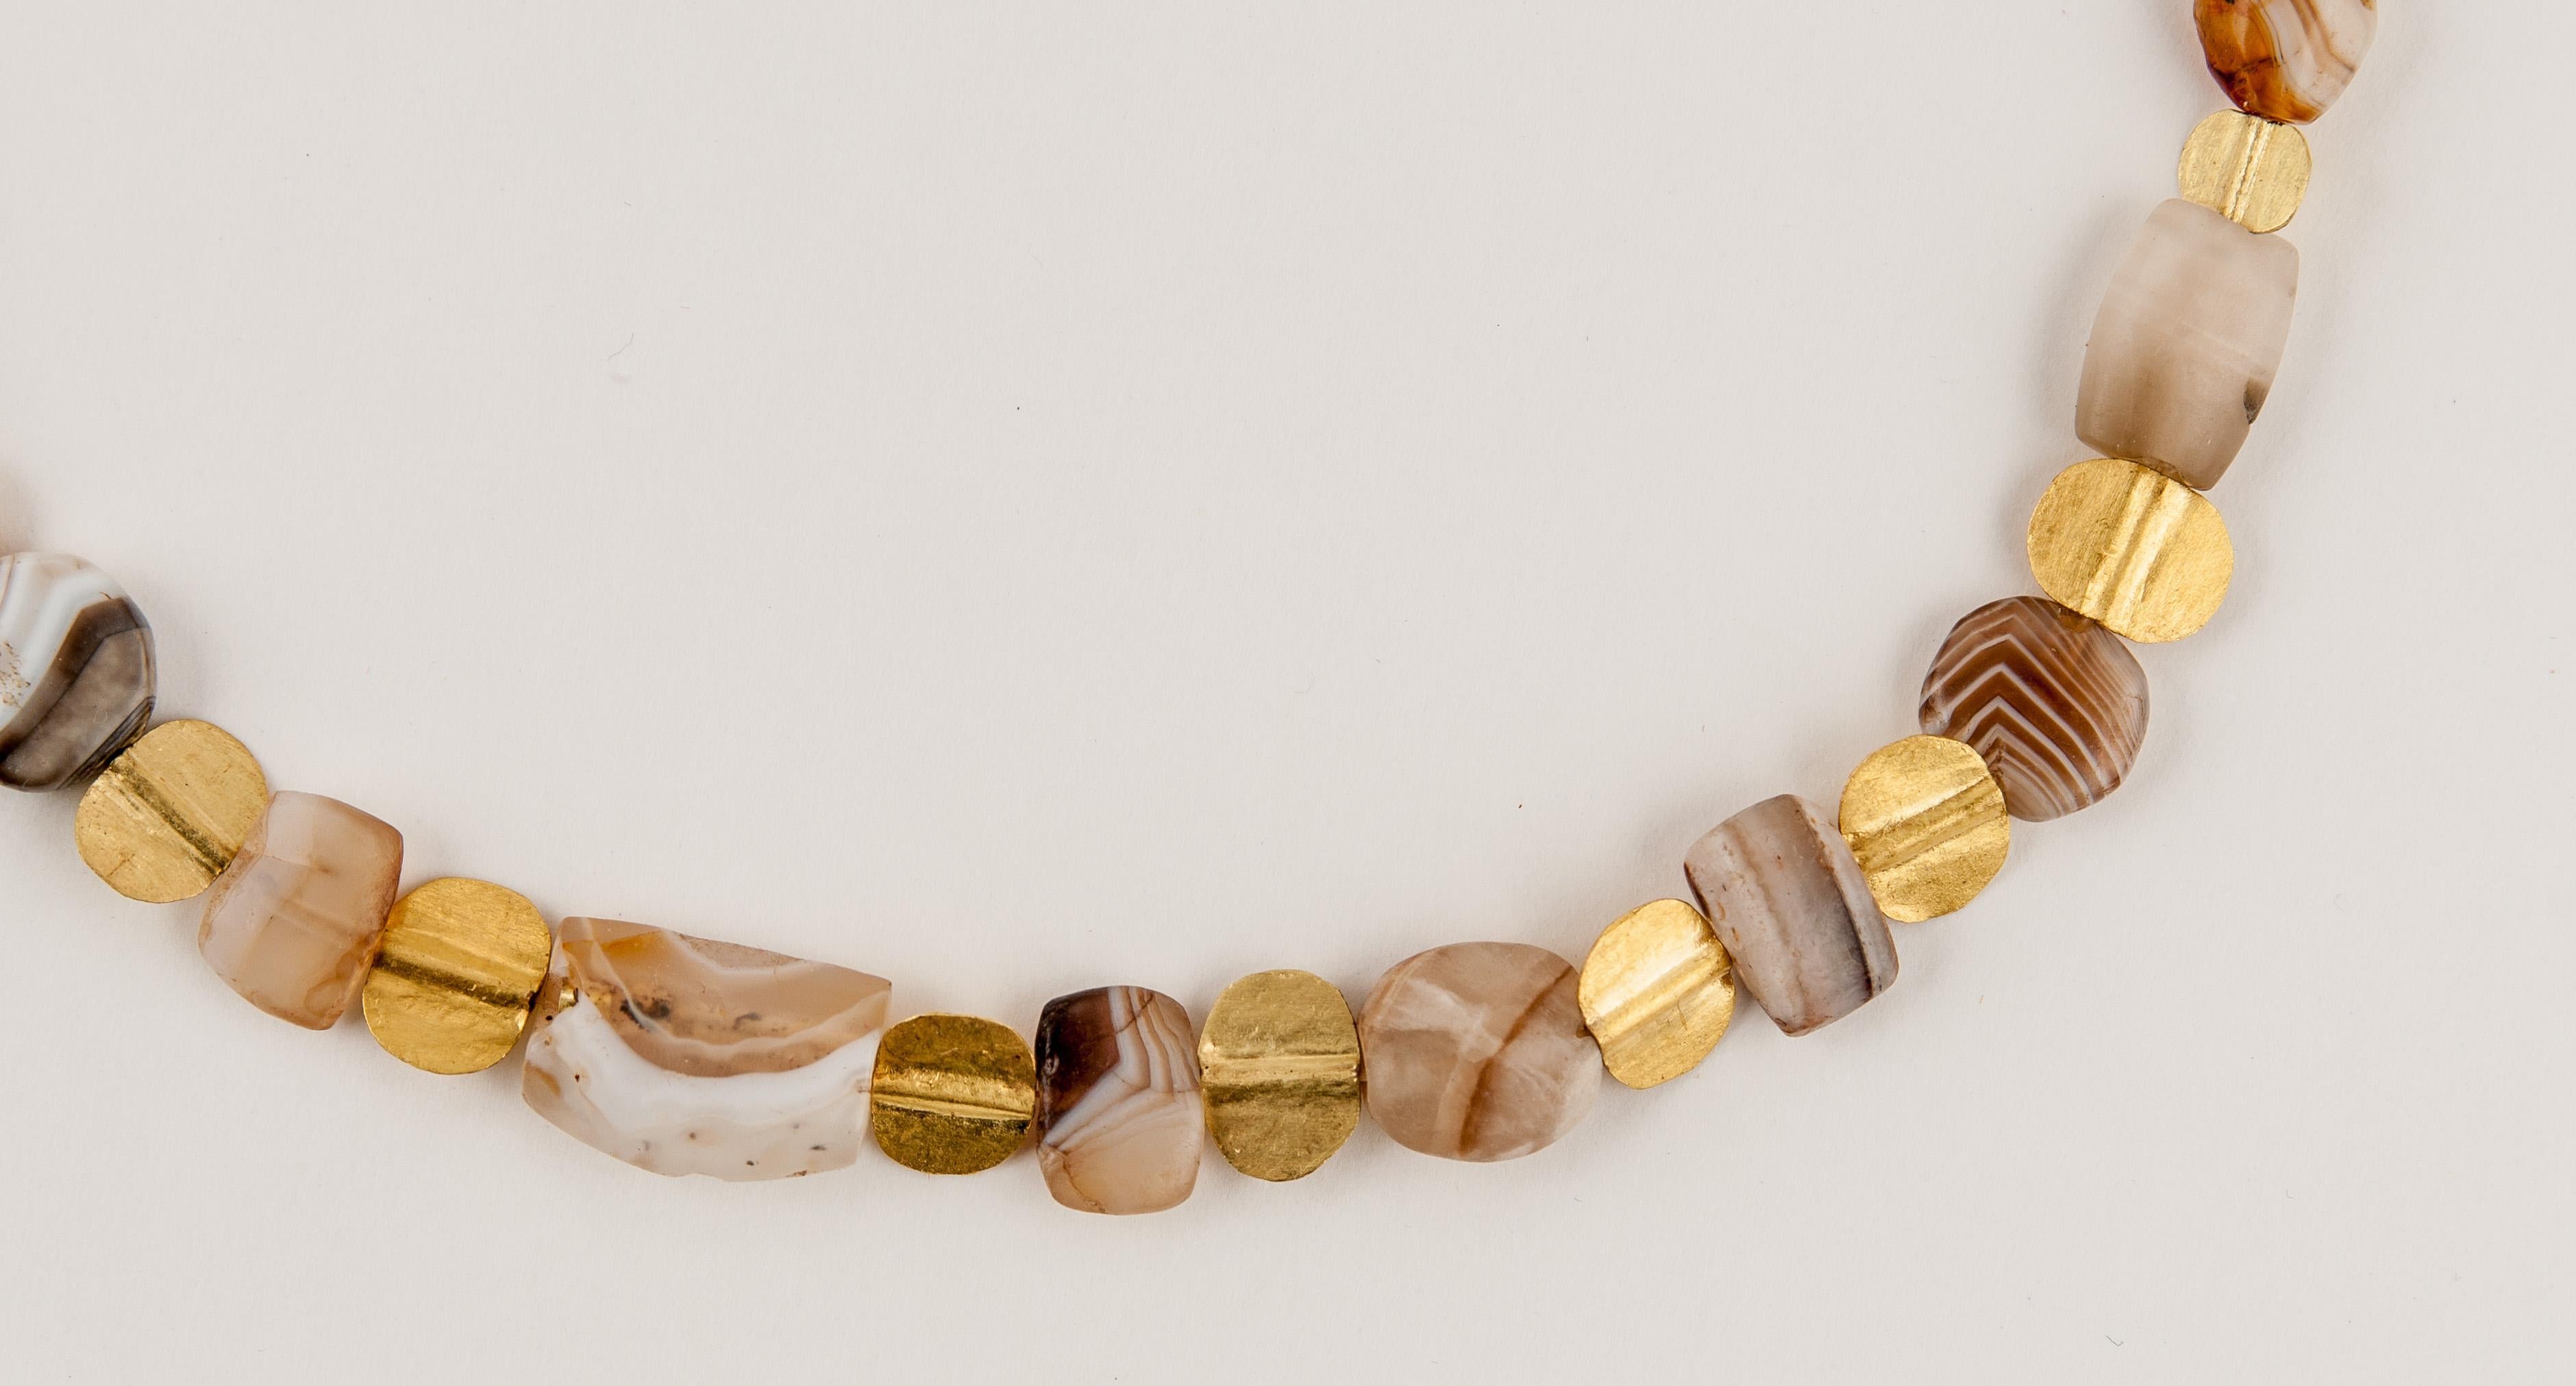 Twenty-three tabular agate beads, agate beads of trapezoidal shape, rectangular shape, ovals and circles and a bow bead in the center, alternating with twenty-two tabular 20k gold beads. The tabular gold beads graduate in size from the front of the